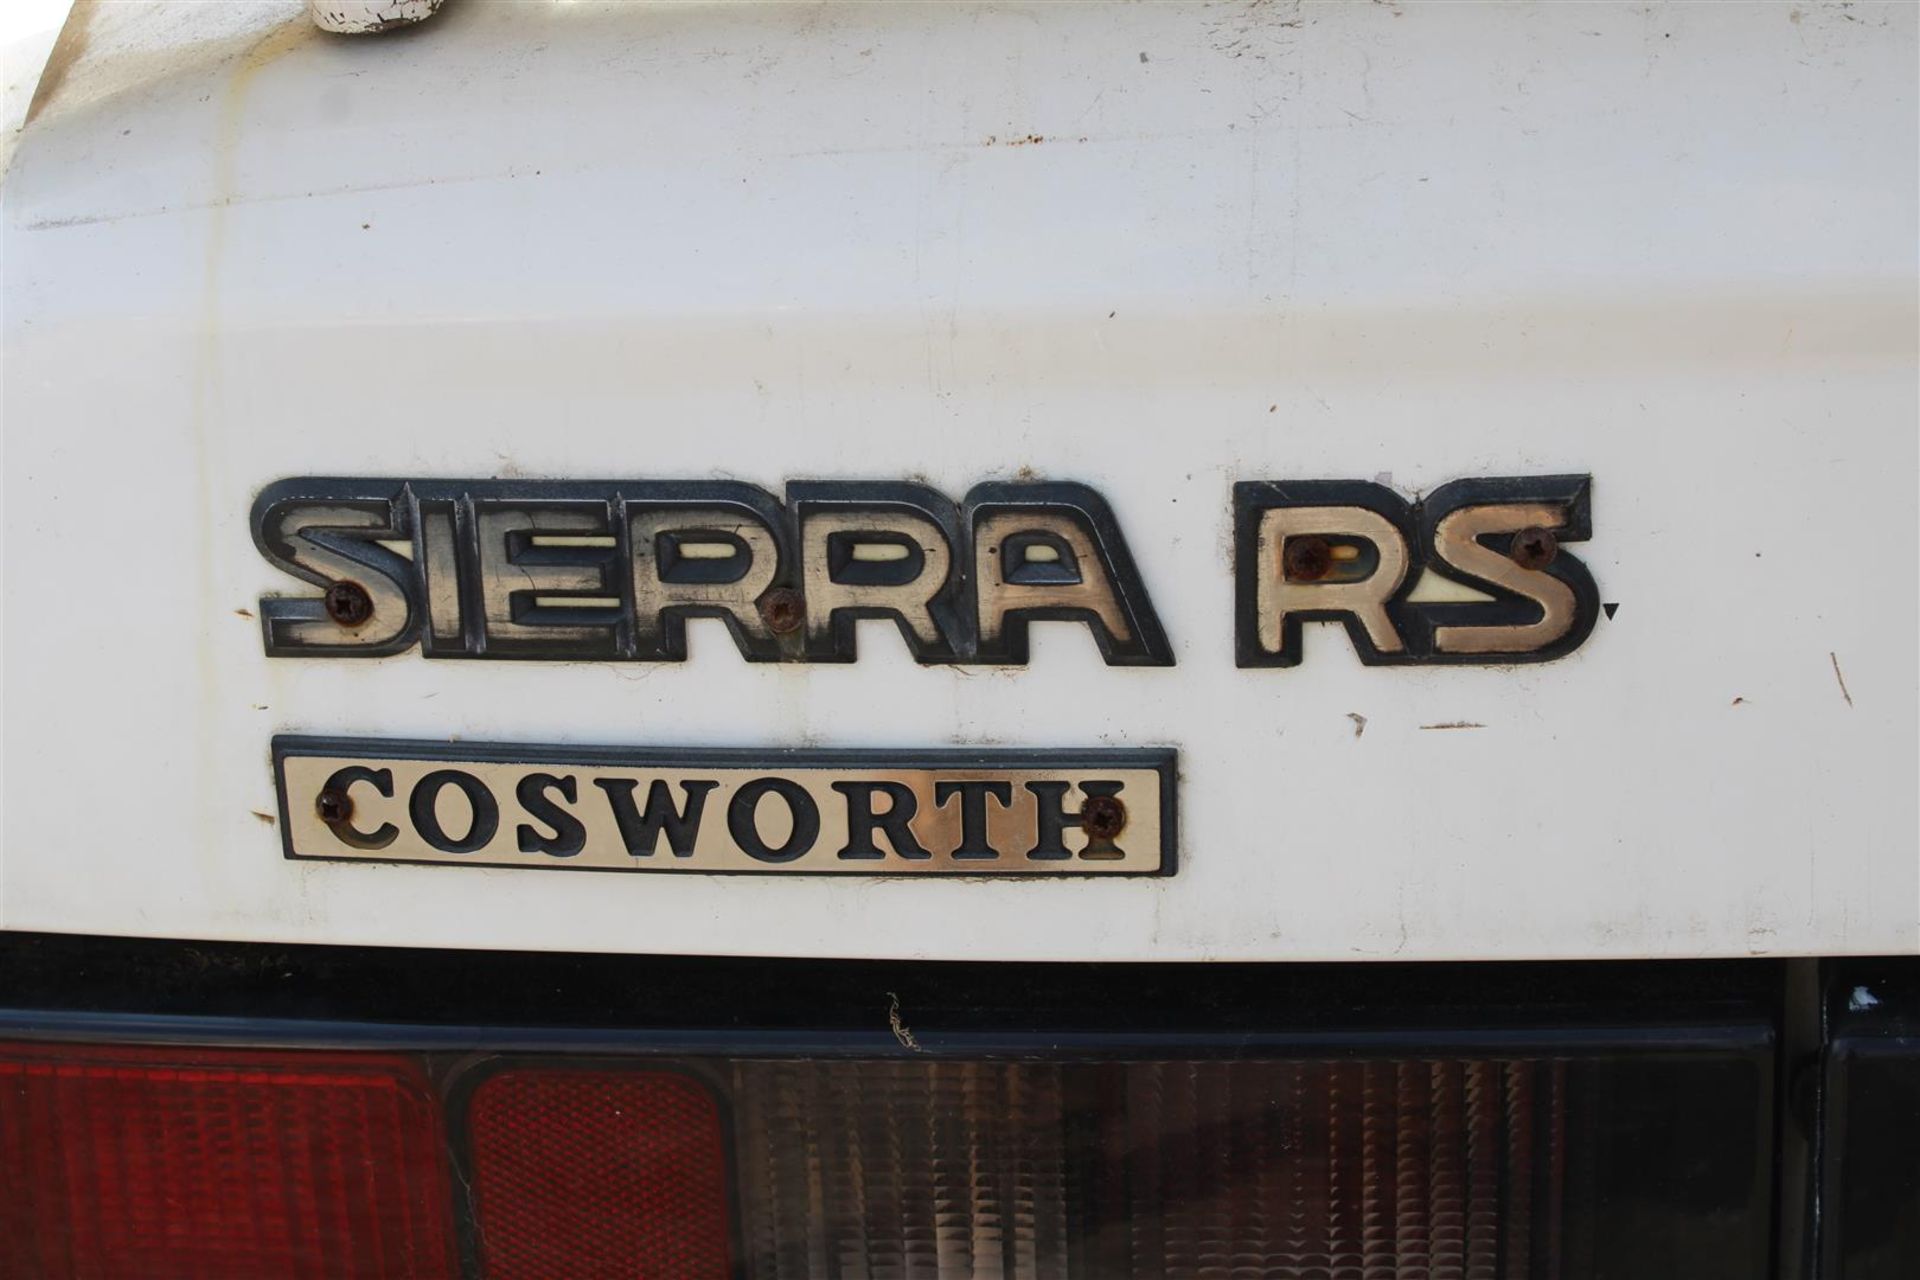 1990 Ford Sierra Sapphire Cosworth (rolling shell) - Image 33 of 35